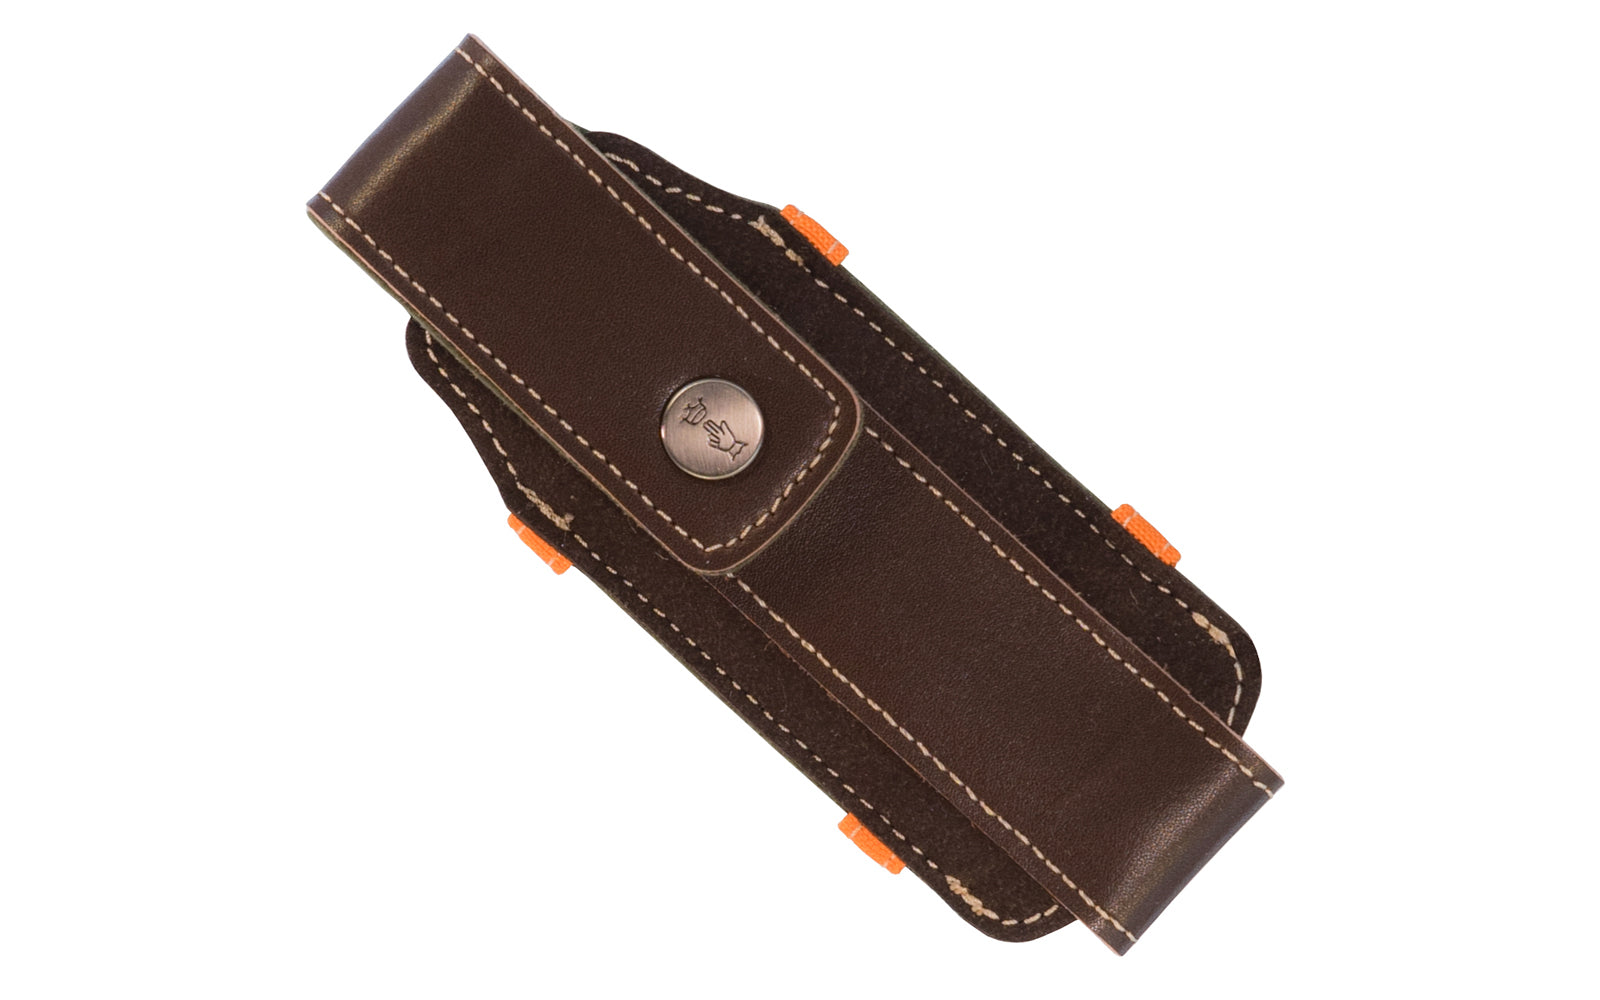 This Opinel Outdoor Medium Brown Knife Sheath sheath can be hung by the orange webbing, or attached to a belt for a snug fit. Made of brown synthetic leather with stitching & a snap enclosure that will keep your knife safely secured during transport.